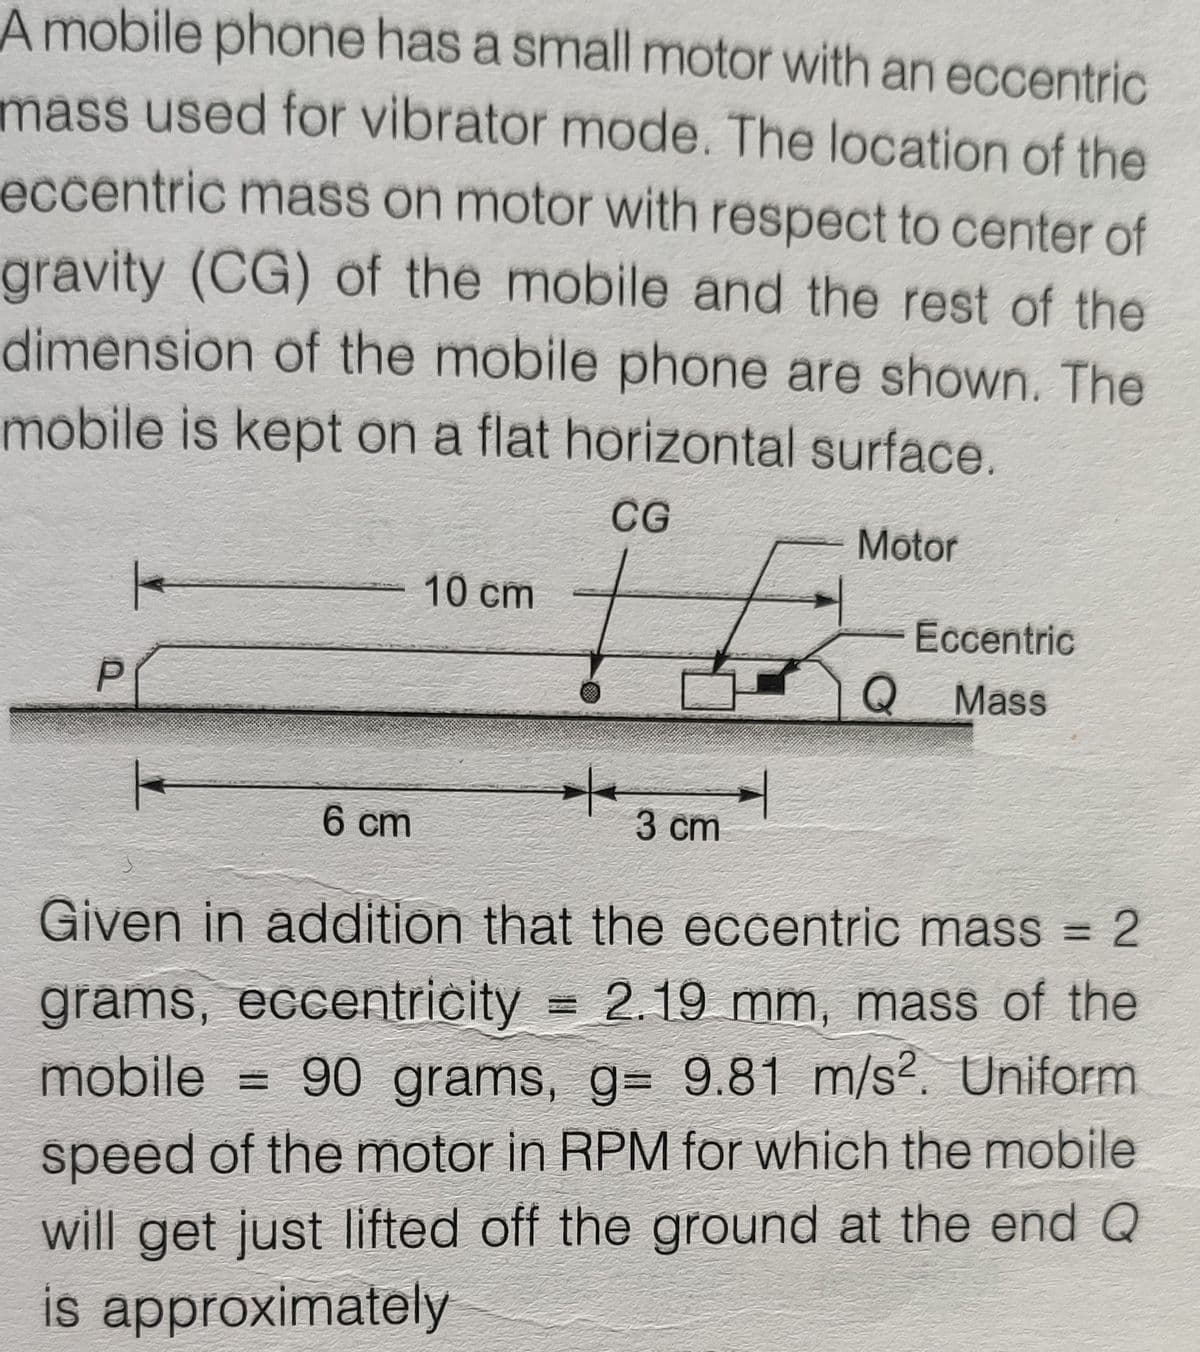 Amobile phone has a small motor with an eccentric
mass used for vibrator mode. The location of the
eccentric mass on motor with respect to center of
gravity (CG) of the mobile and the rest of the
dimension of the mobile phone are shown. The
mobile is kept on a flat horizontal surface.
CG
Motor
10 cm
Eccentric
Mass
6 cm
3 cm
Given in addition that the eccentric mass = 2
grams, eccentricity 2.19 mm, mass of the
mobile = 90 grams, g= 9.81 m/s?. Uniform
speed of the motor in RPM for which the mobile
will get just lifted off the ground at the end Q
is approximately
